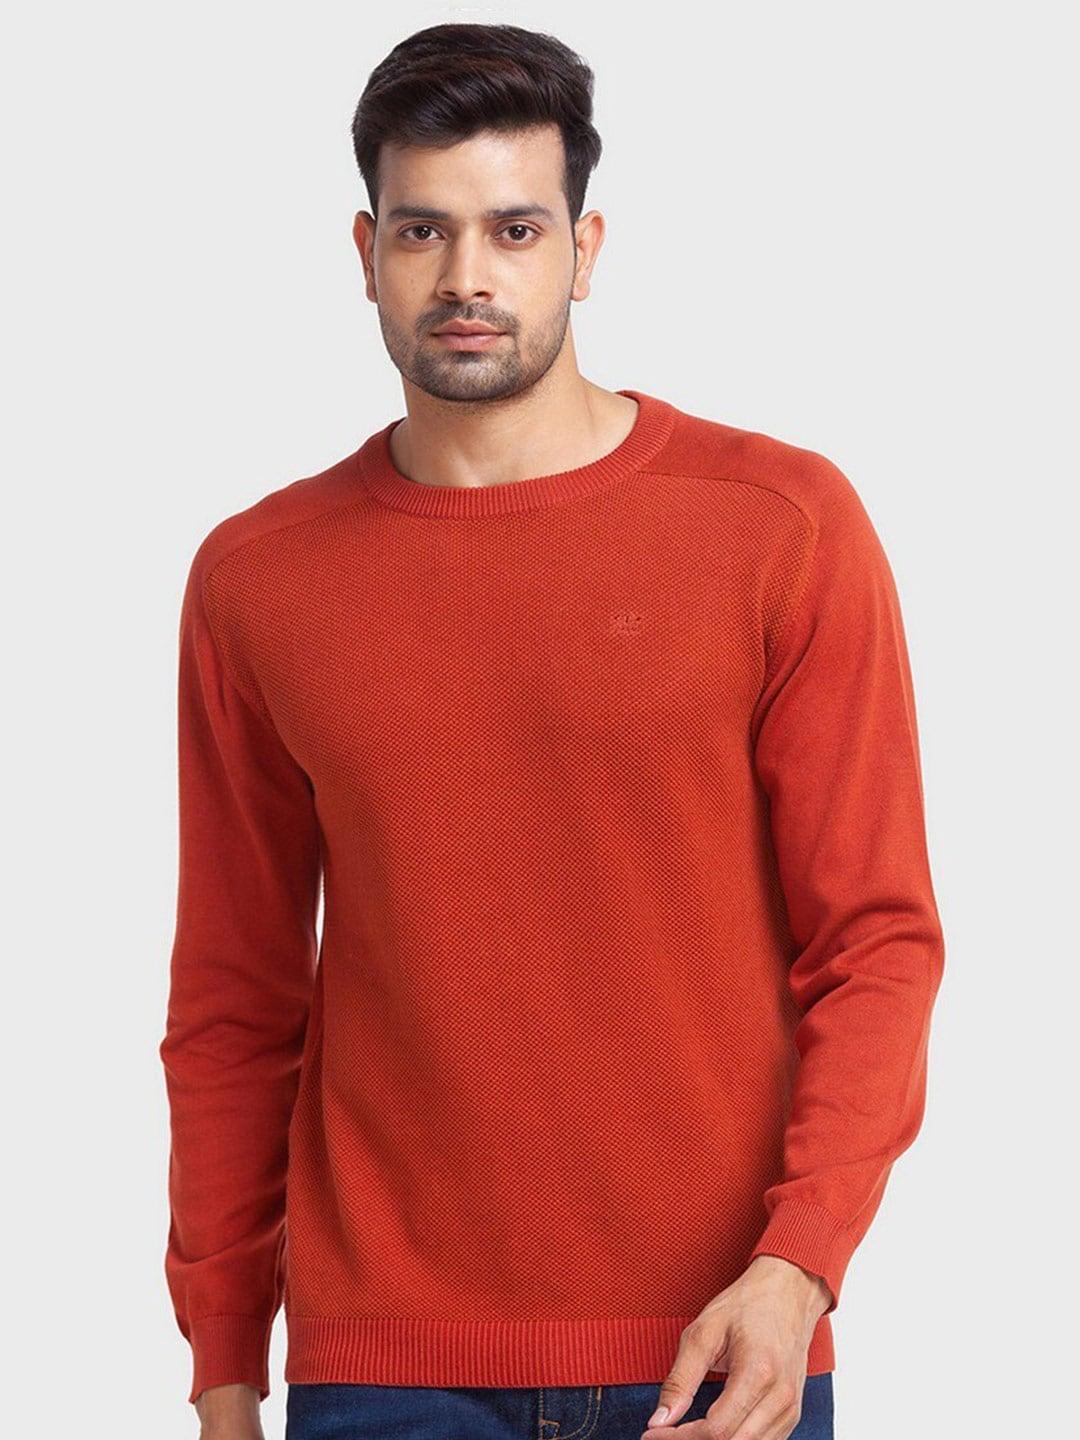 colorplus men round neck ribbed long sleeves cotton pullover